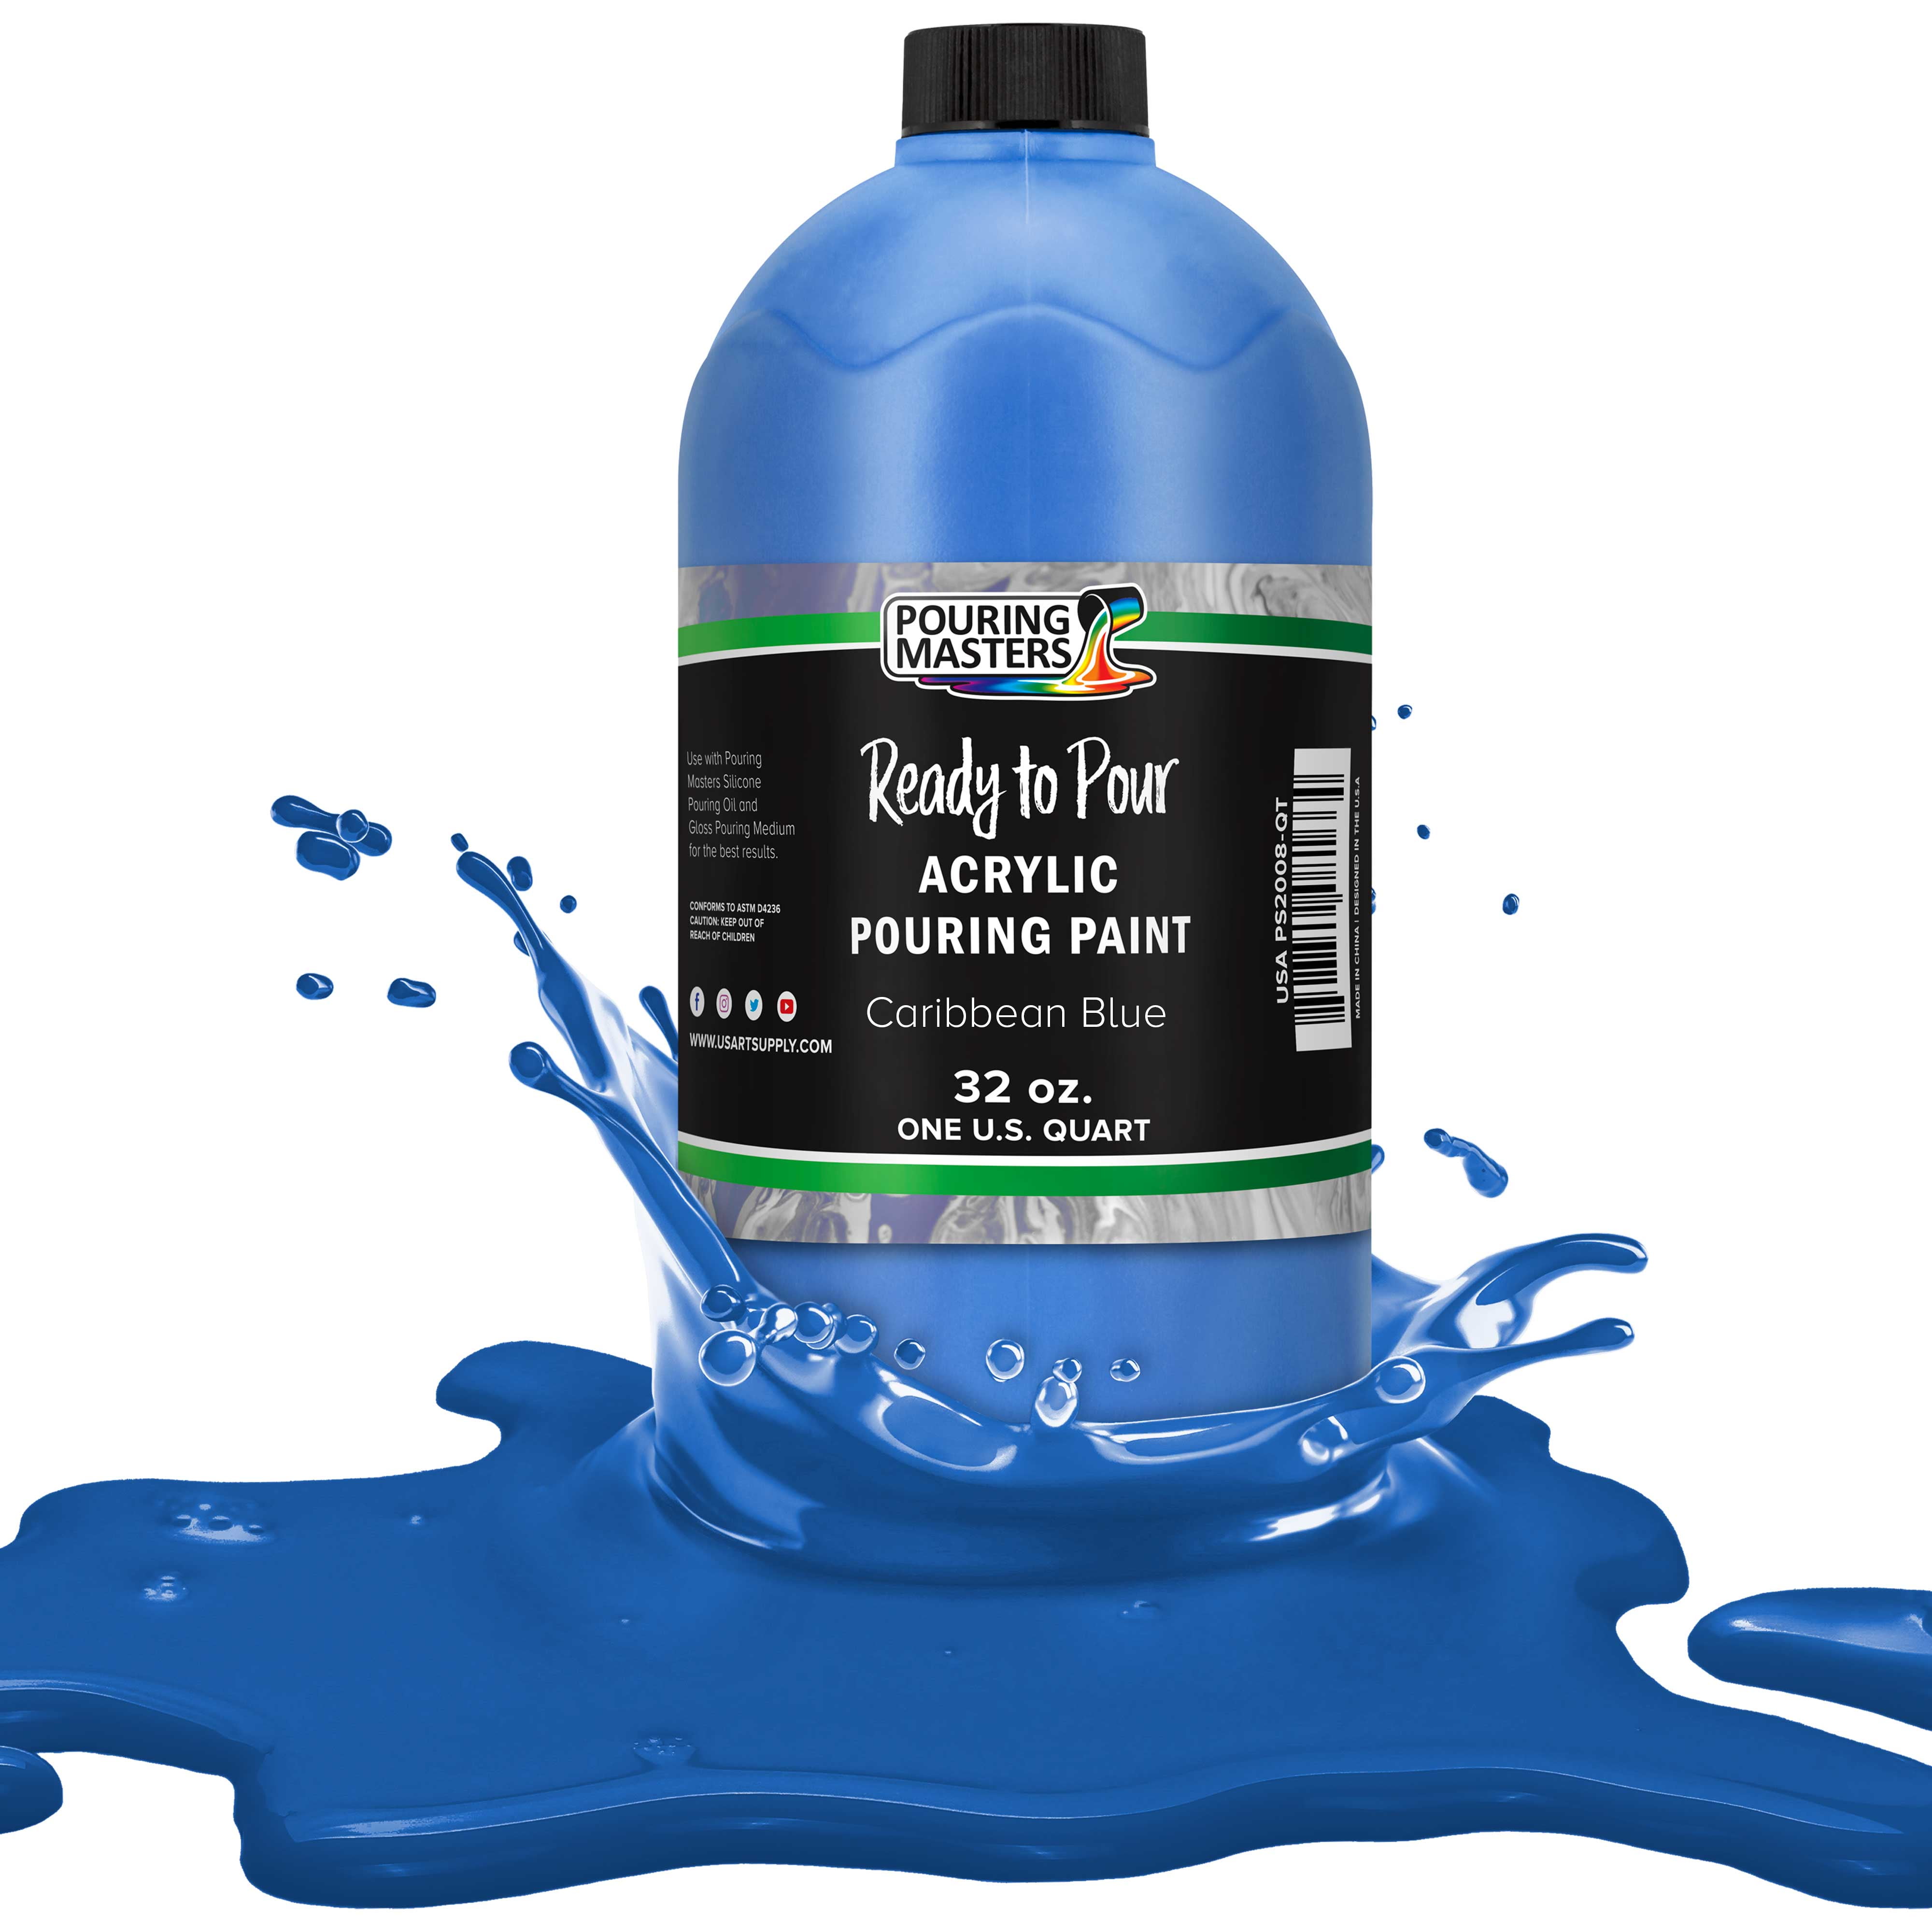 Pouring Masters Caribbean Blue Acrylic Ready to Pour Pouring Paint